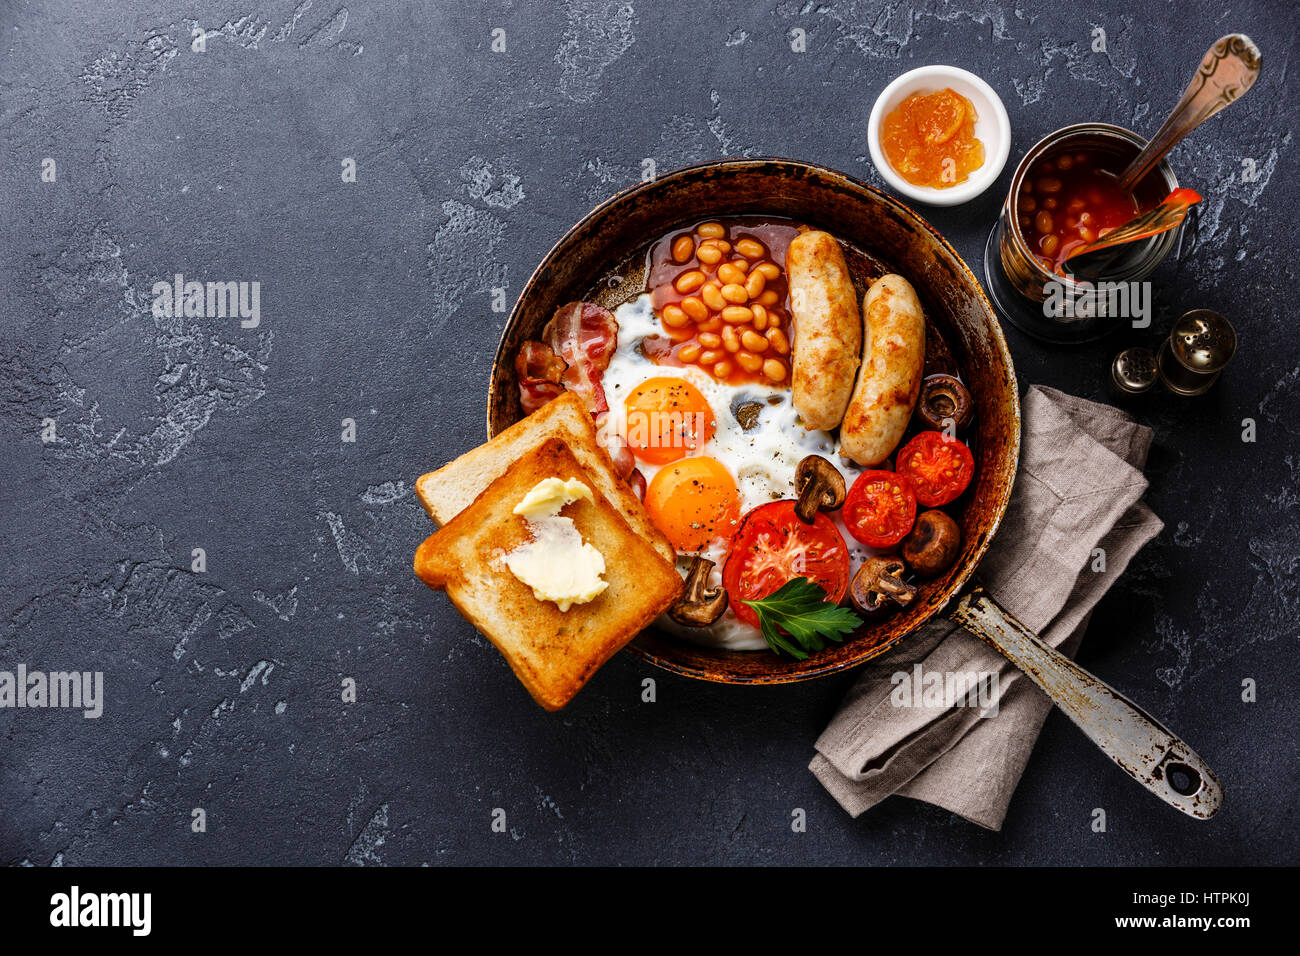 English Breakfast in cooking pan with fried eggs, sausages, bacon, beans and bread toasts on dark stone background copy space Stock Photo